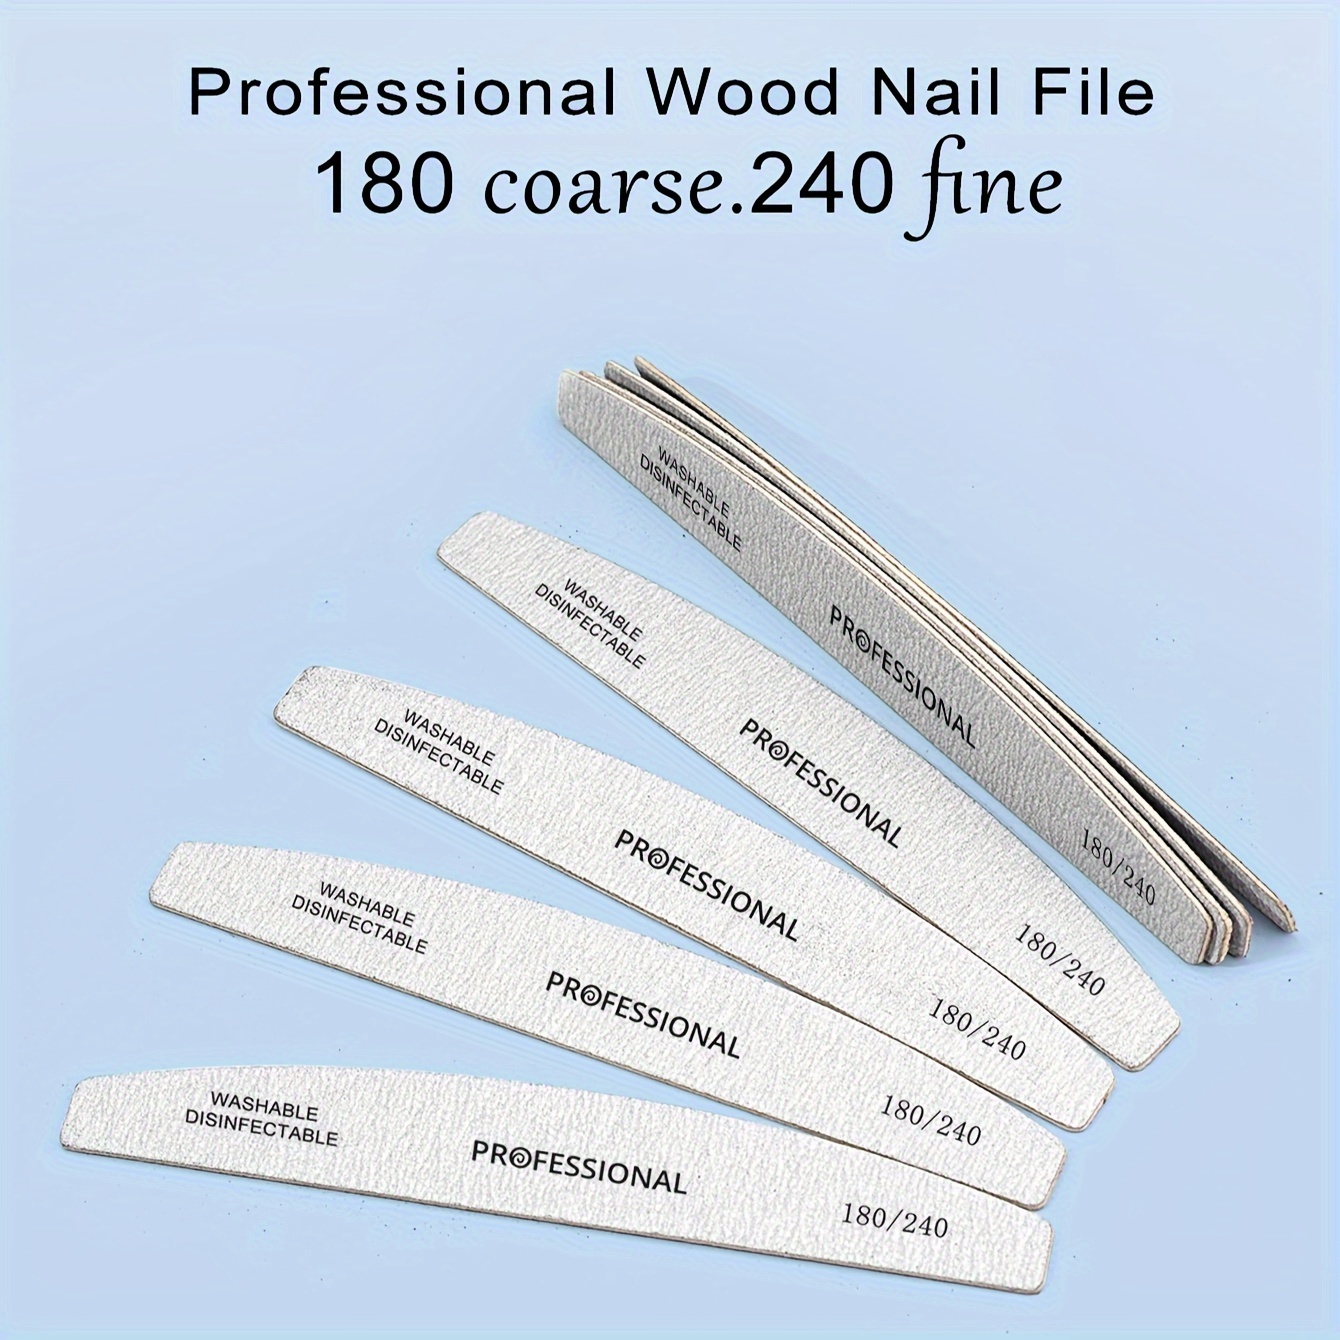 

5-pack Professional Wood Nail Files And Buffers Set - Dual Grit 180/240 Coarse Fine, Washable And Disinfectable, Unscented Manicure Tools For Shaping And Smoothing Nails